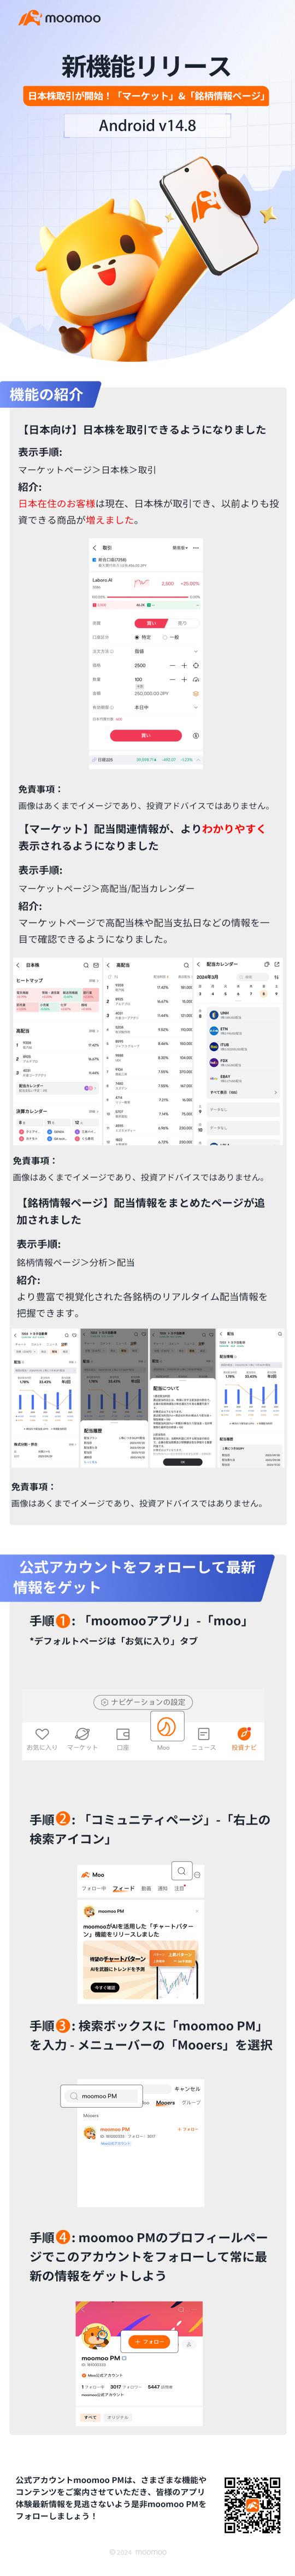 New feature released: Japanese stock trading has started! “Market” & “Stock Information Page” Android v14.8